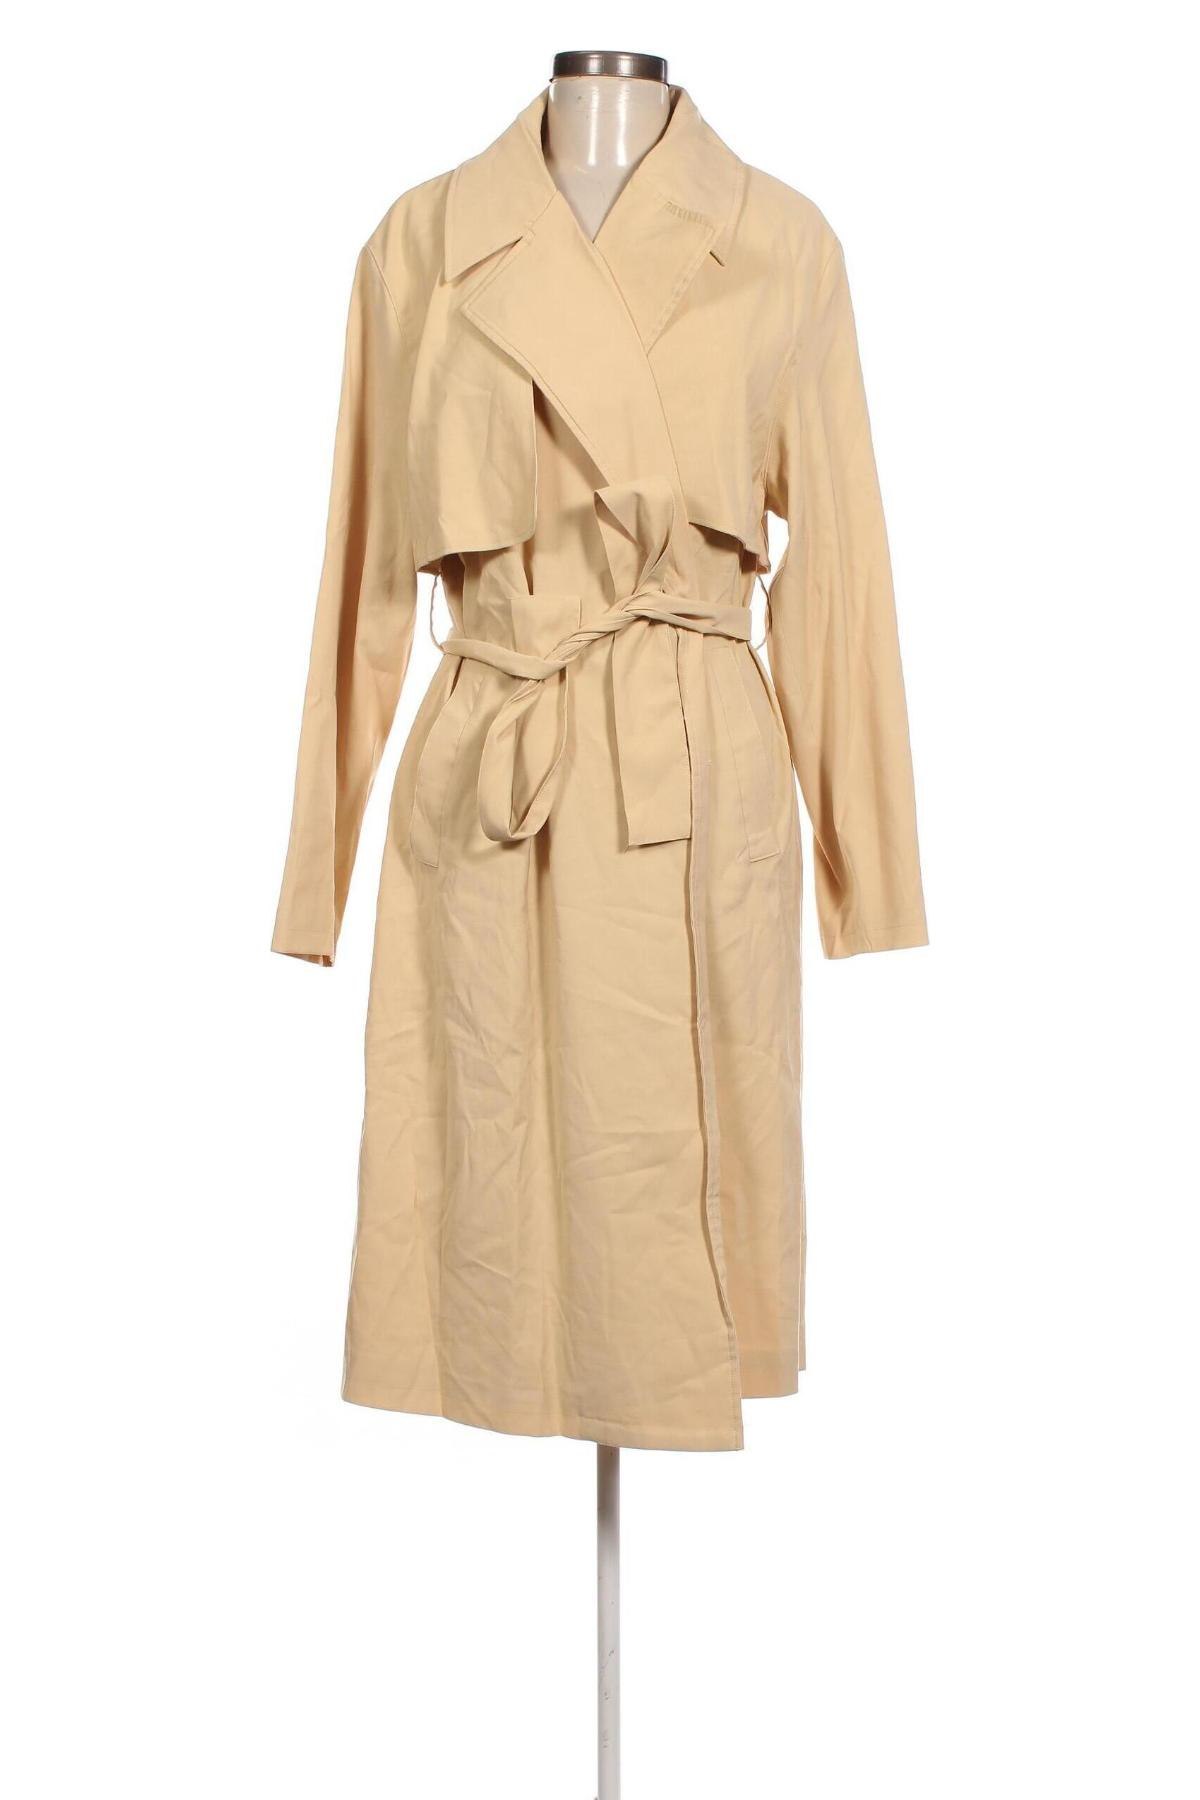 Damen Trench Coat Katy Perry exclusive for ABOUT YOU, Größe XS, Farbe Ecru, Preis € 49,48